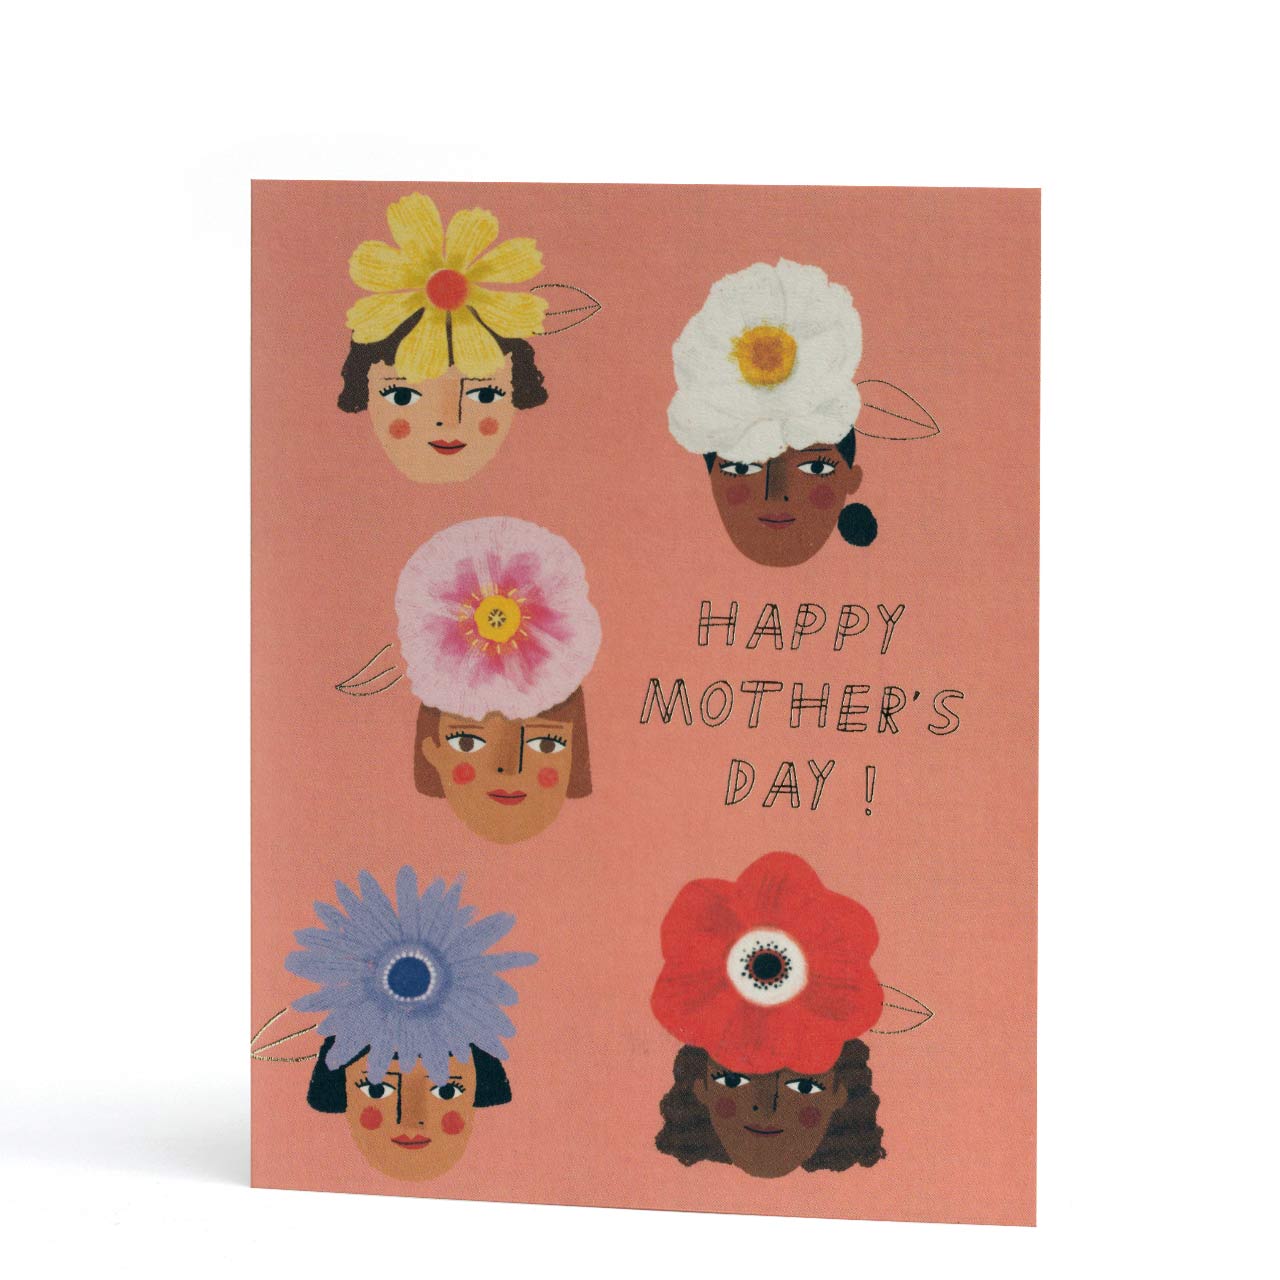 Floral Mama's Mother's Day Greeting Card